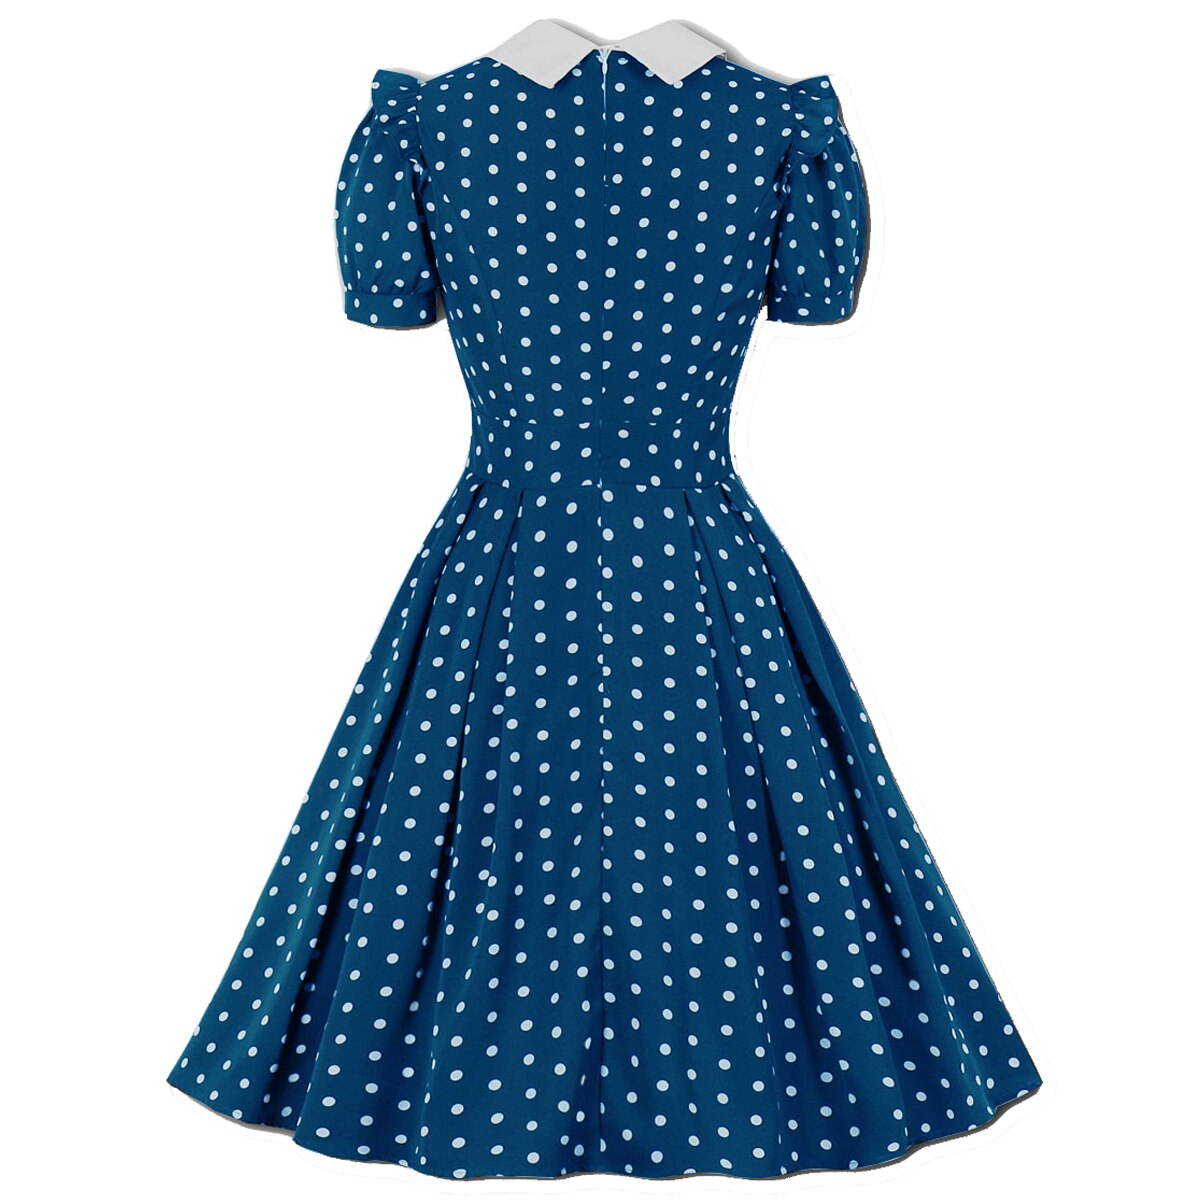 Blue Green Vintage Retro Chiffon Party Women Dress Polka Dots Print Turn Down Collar With Bow Rockabilly A Line Party Sundress